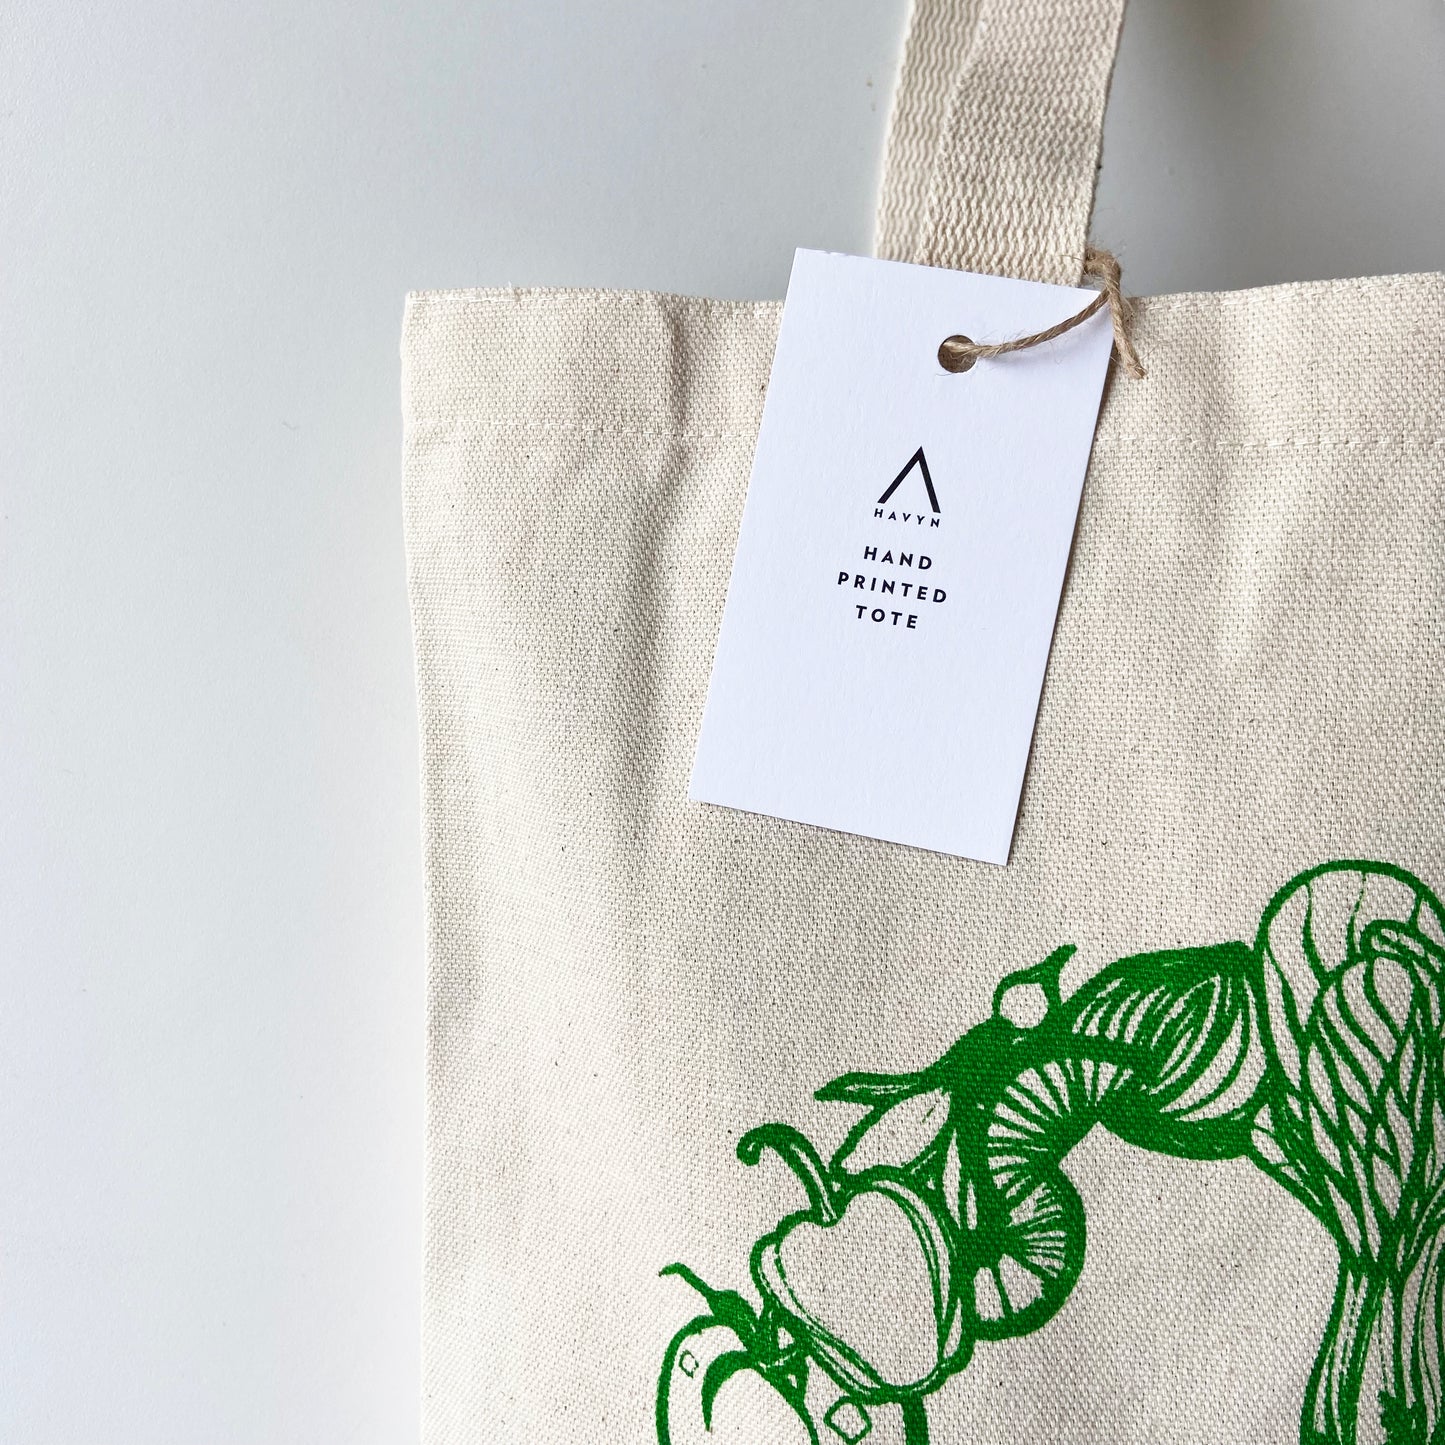 Peace Veggies Hand Printed Every Day Cotton Tote